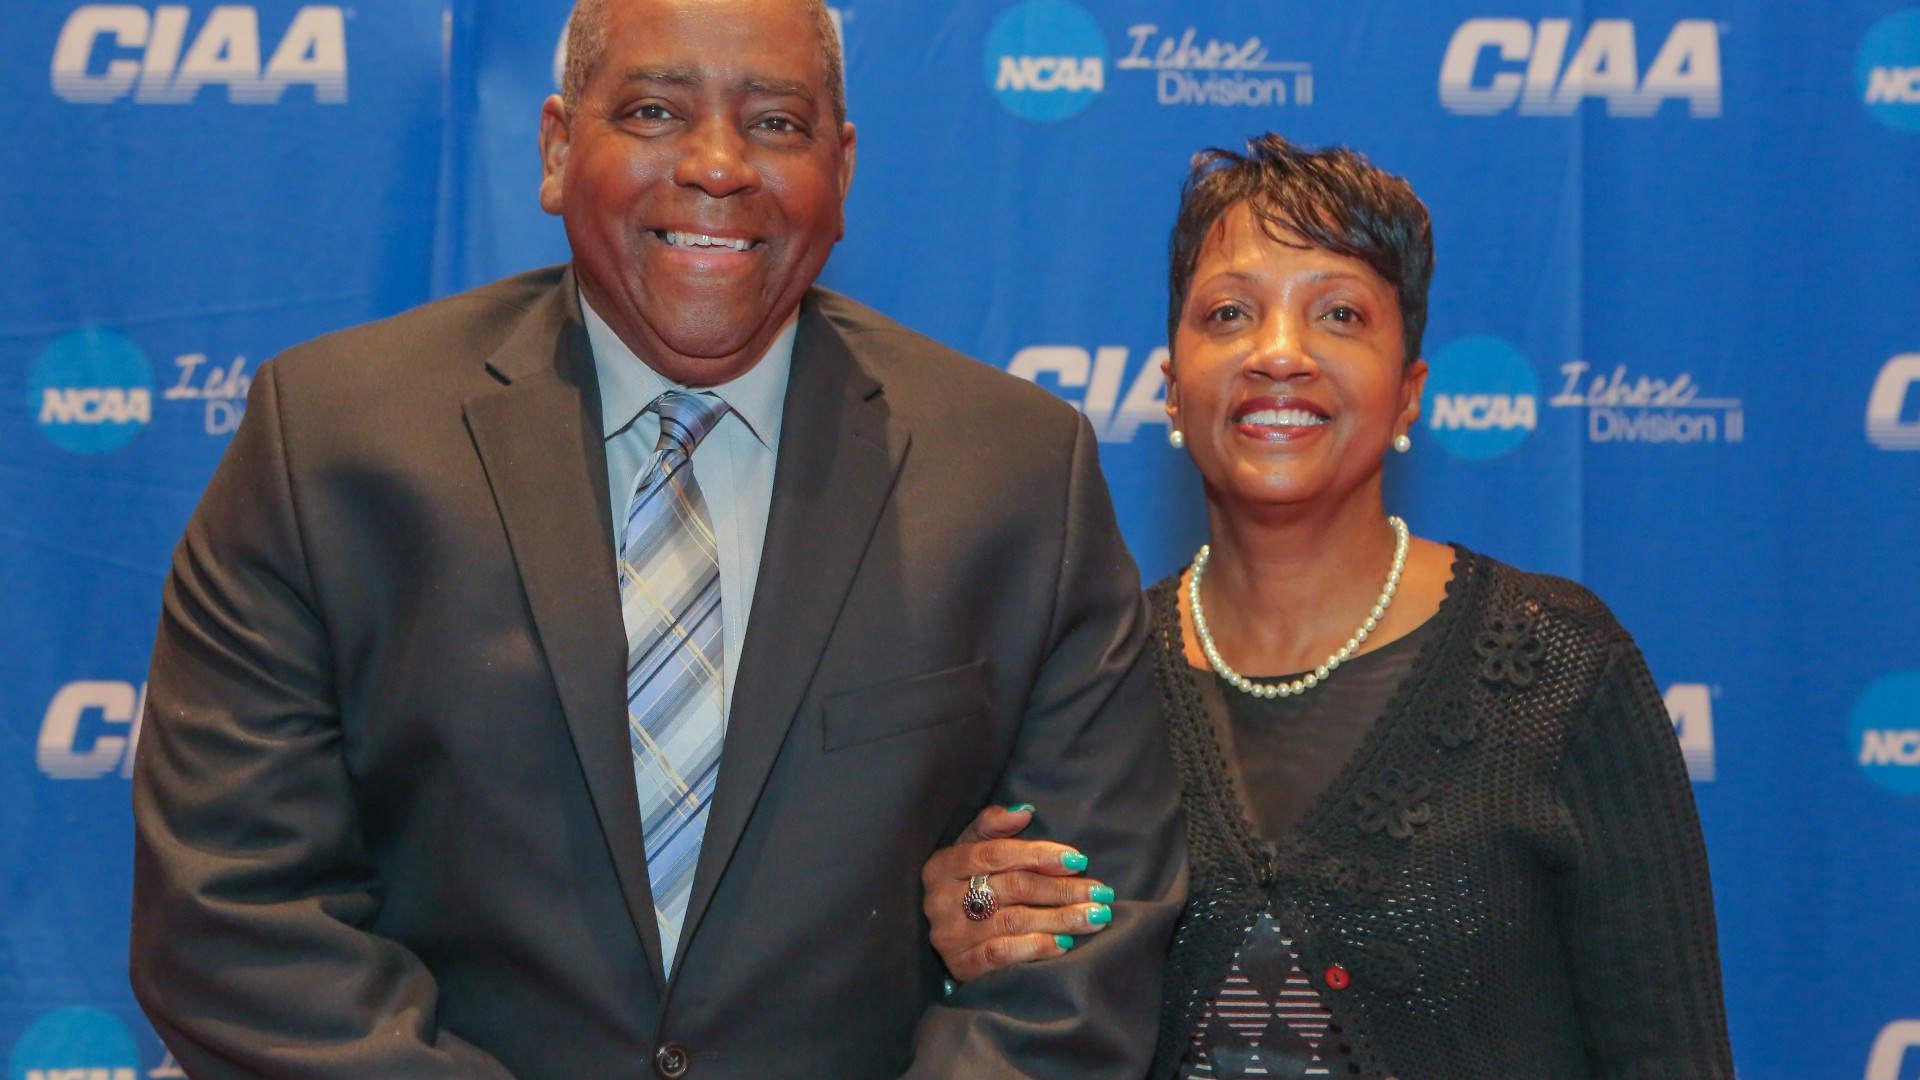 Steve Joyner Sr. with his wife Narell at the CIAA Hall of Fame Induction Ceremony of Steve Joyner Sr. 